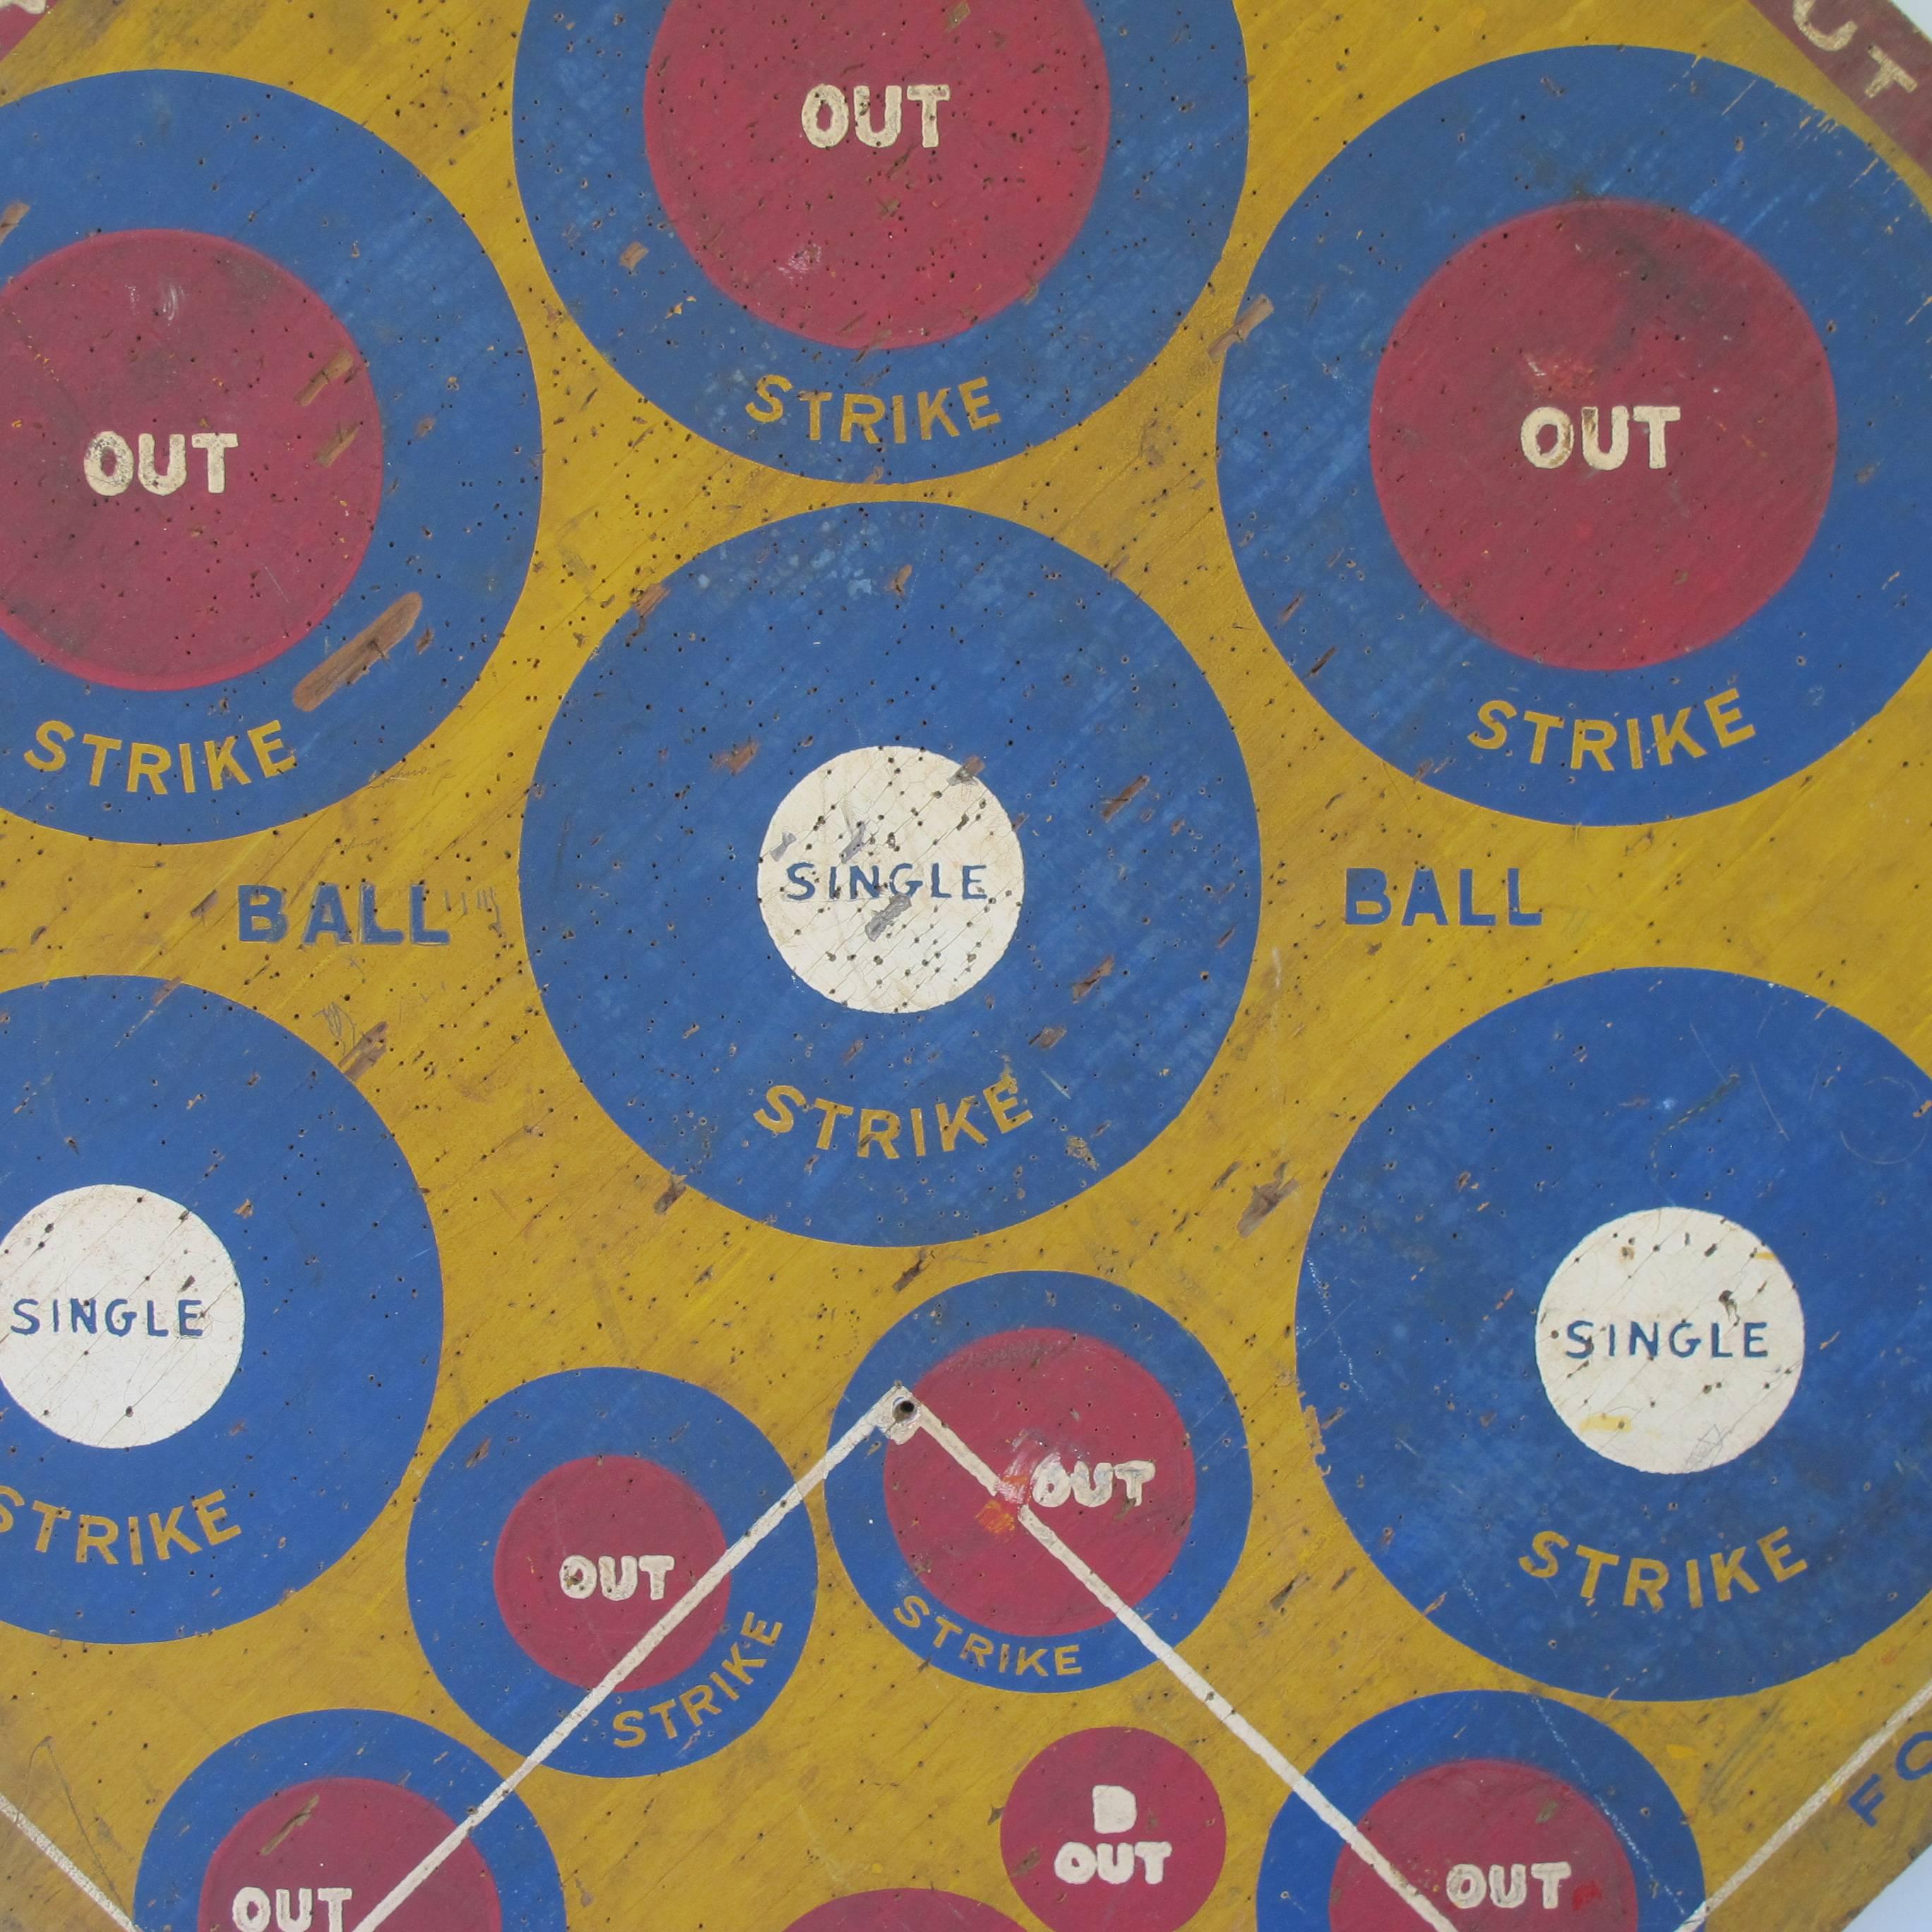 Graphic dart game board with painted circles for pitches, hits and outs. A golf game equally graphic painted on reverse side. Marked Rainshine Golf, copyrighted by E.W. Love, Joplin Mo.1932.